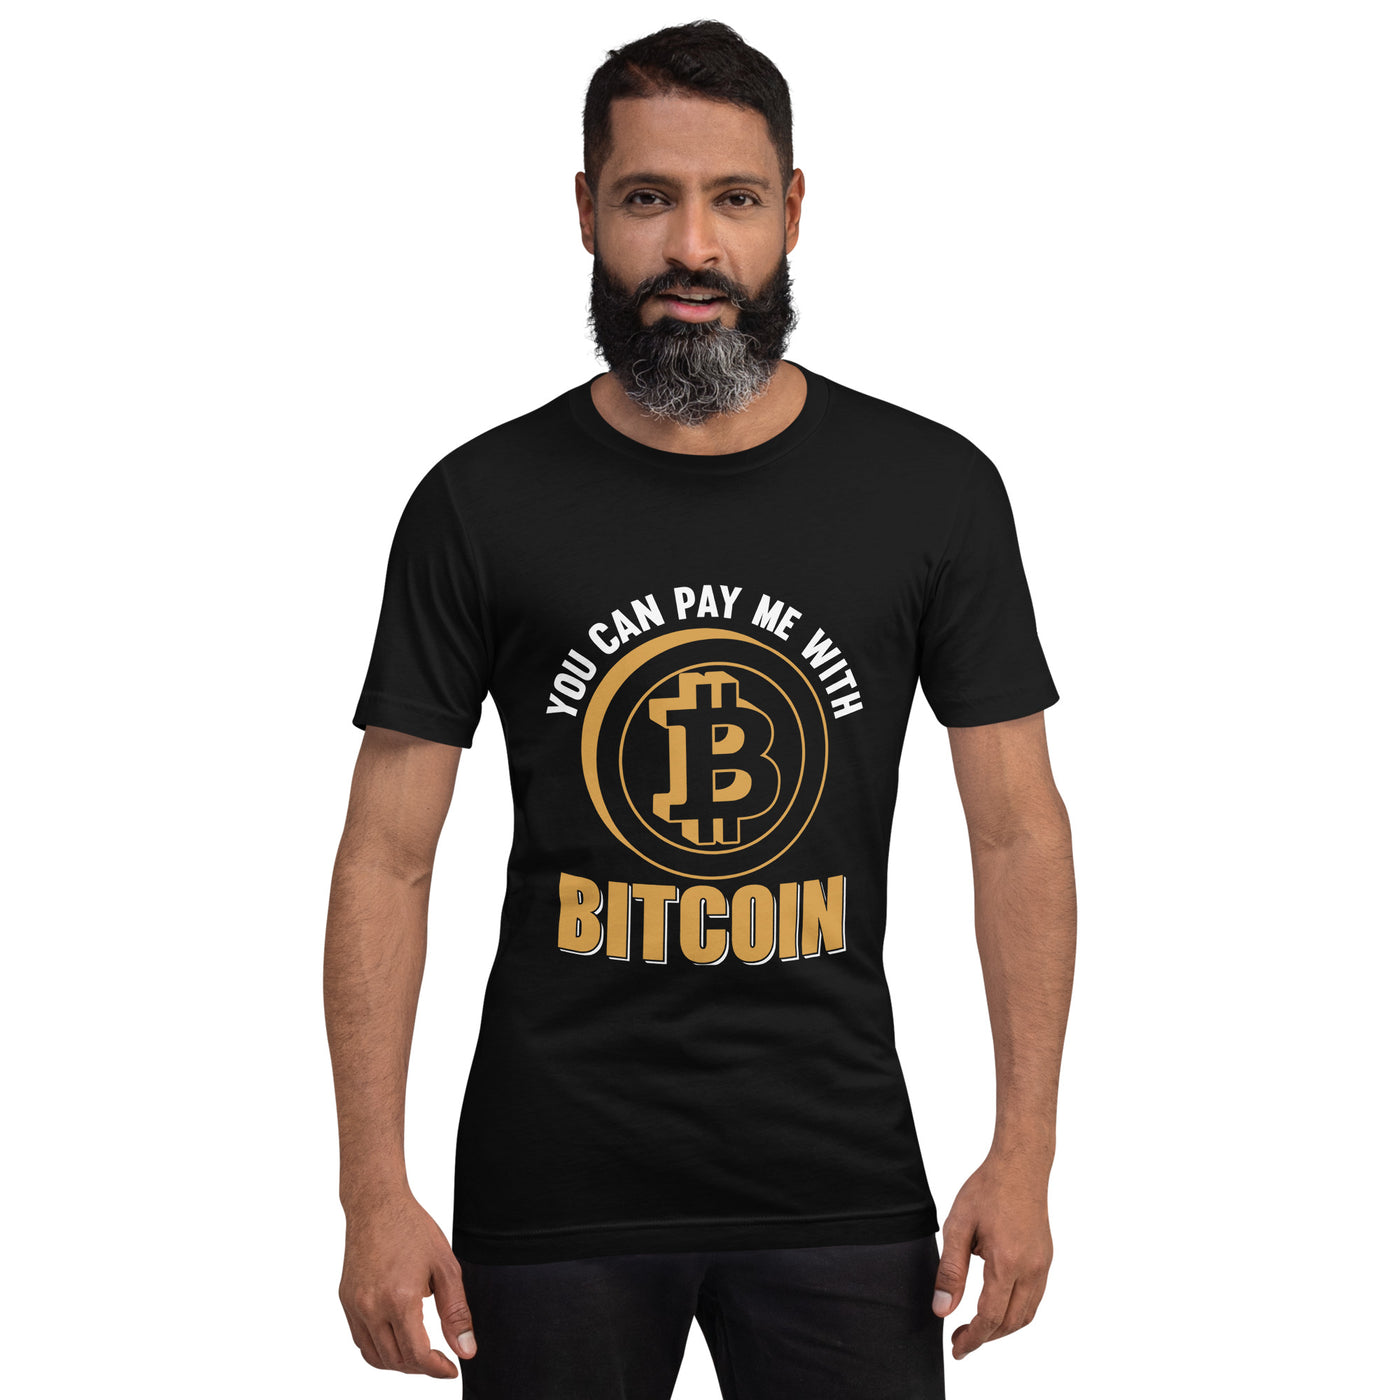 You can Pay me with Bitcoin Unisex t-shirt